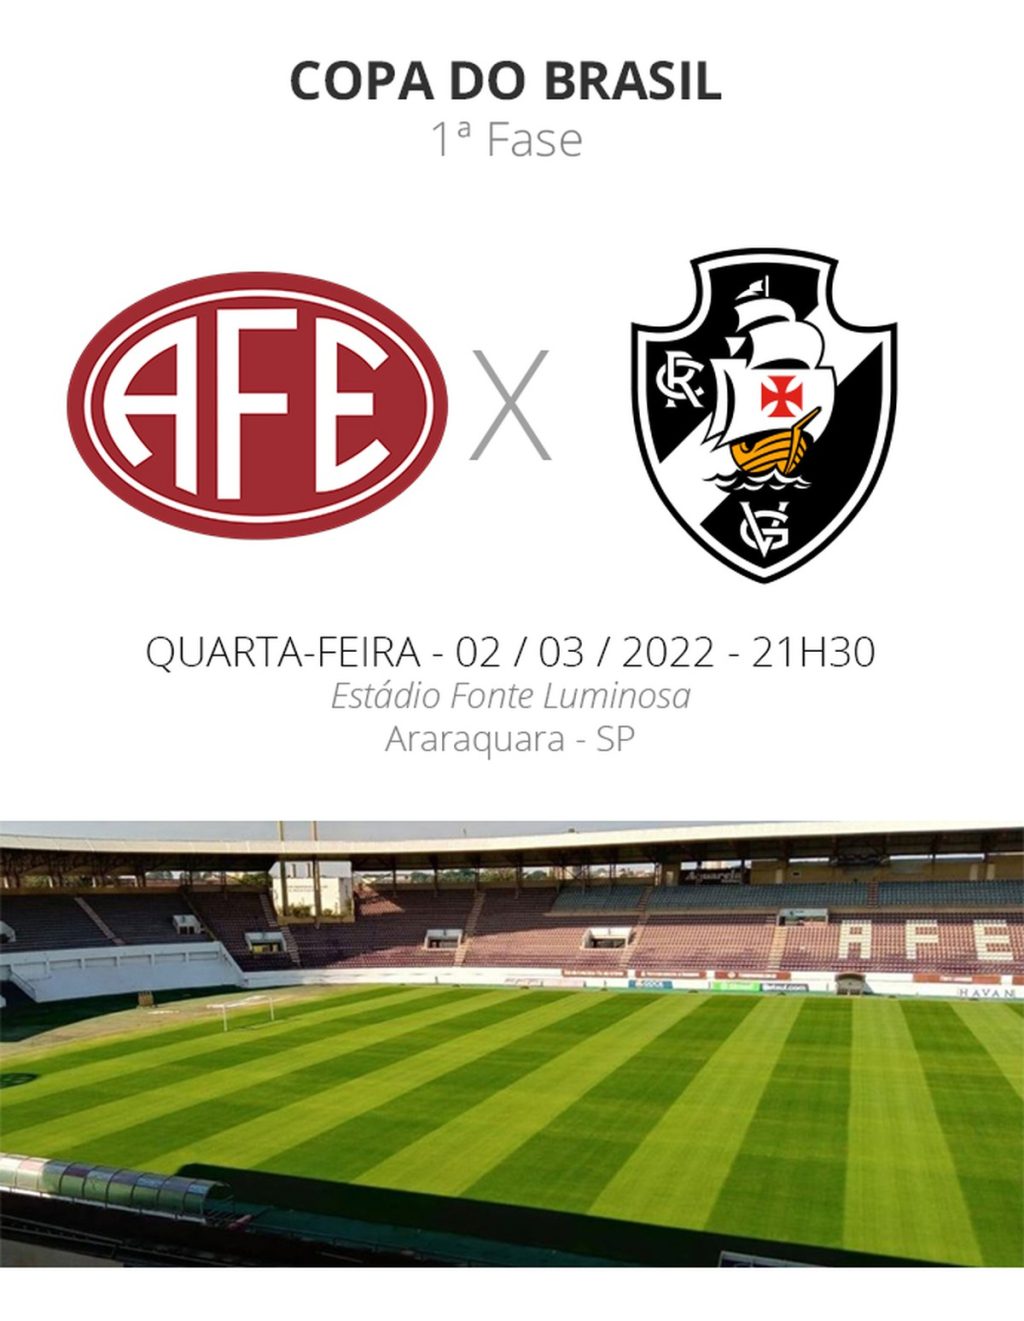 Ferroviária x Vasco: Watch where to watch, embezzlement, lineups and judging |  Brazil Cup